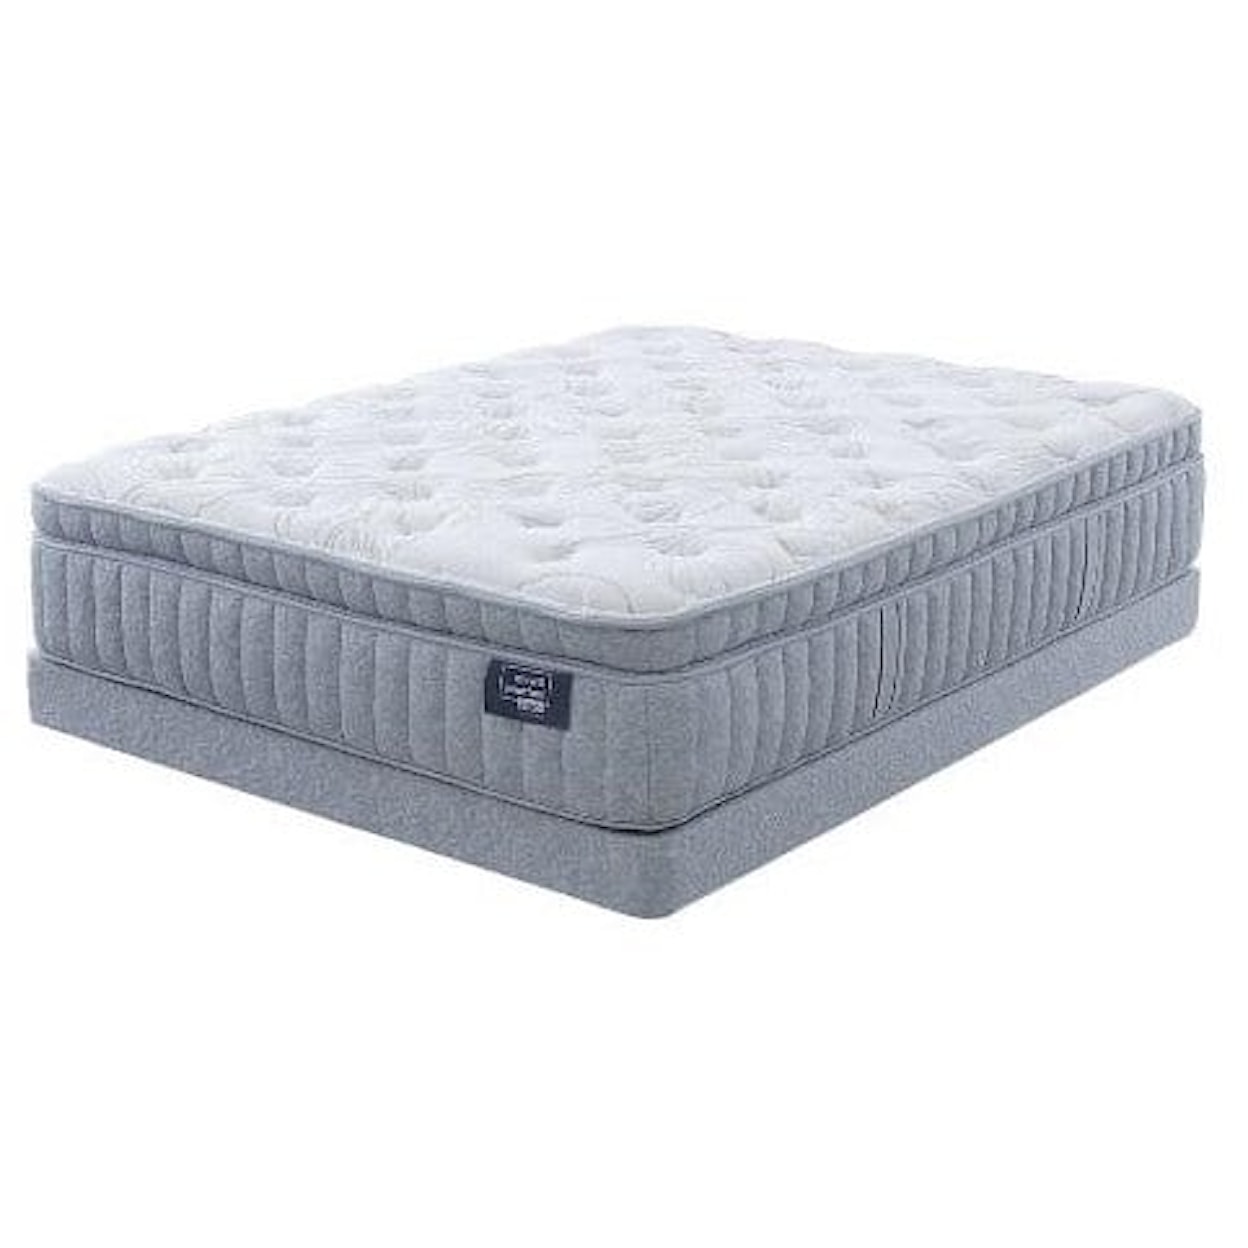 Drew & Jonathan Home by Restonic Mattress Bellflower Extra Firm Queen Extra Firm Low Profile